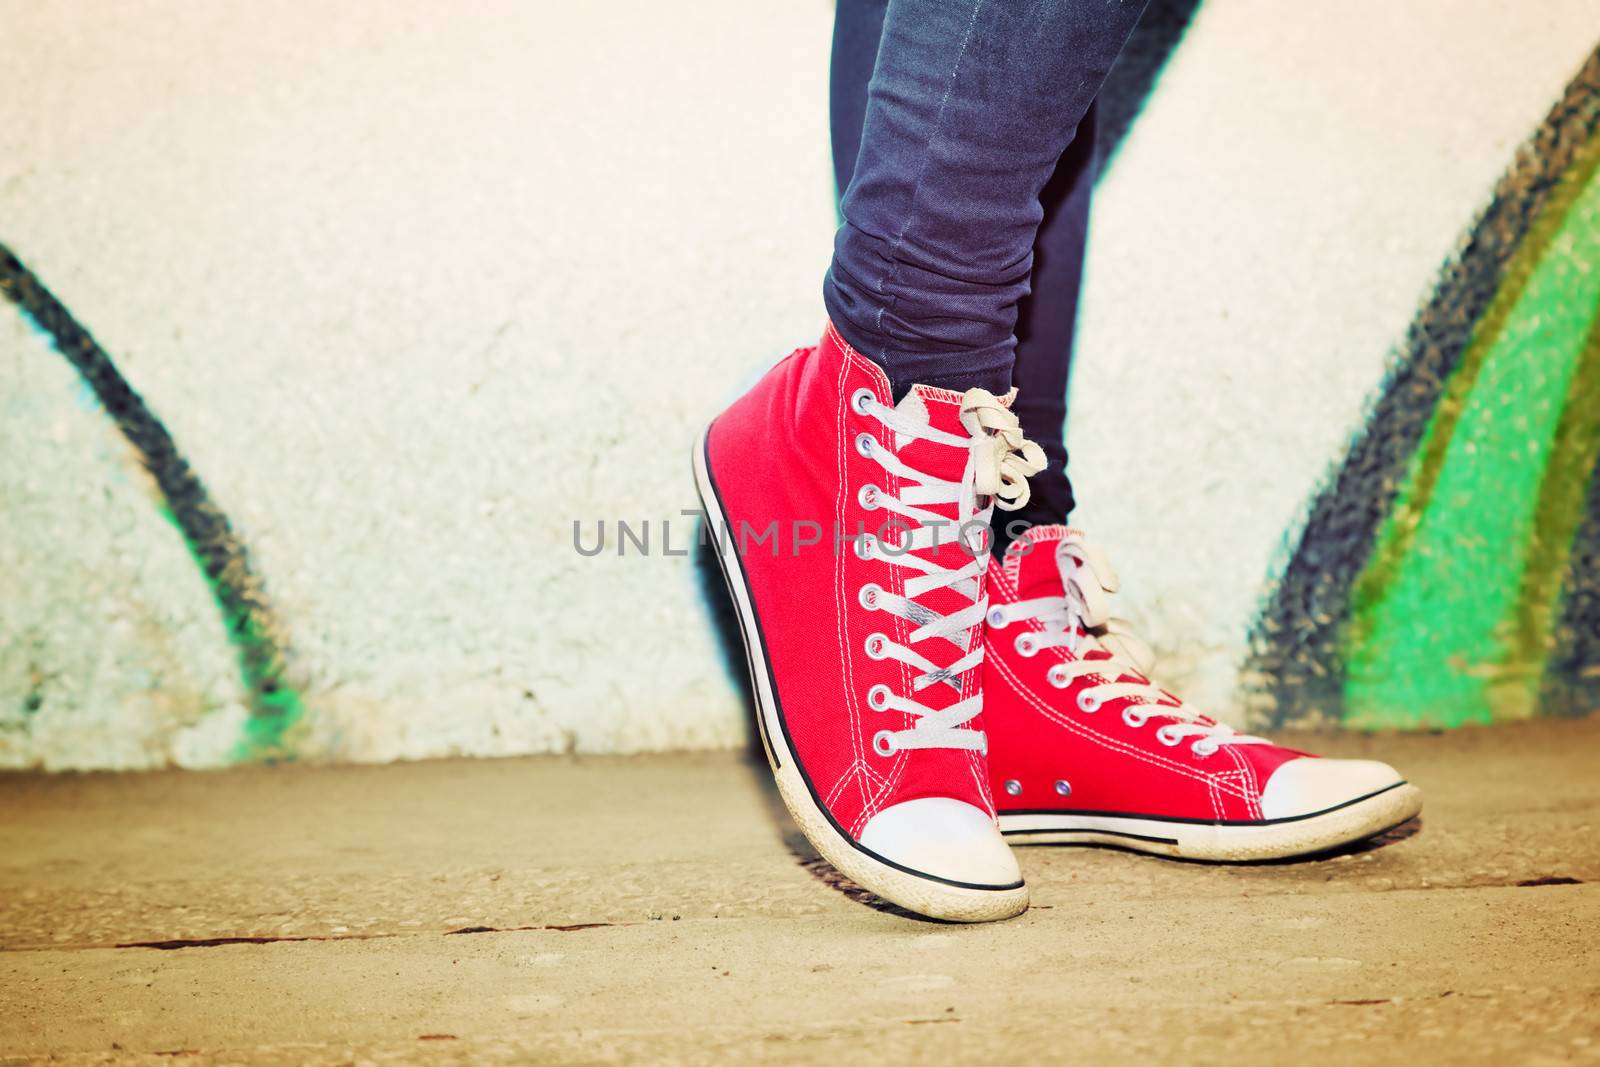 Close up of red sneakers worn by a teenager. Grunge graffiti wall